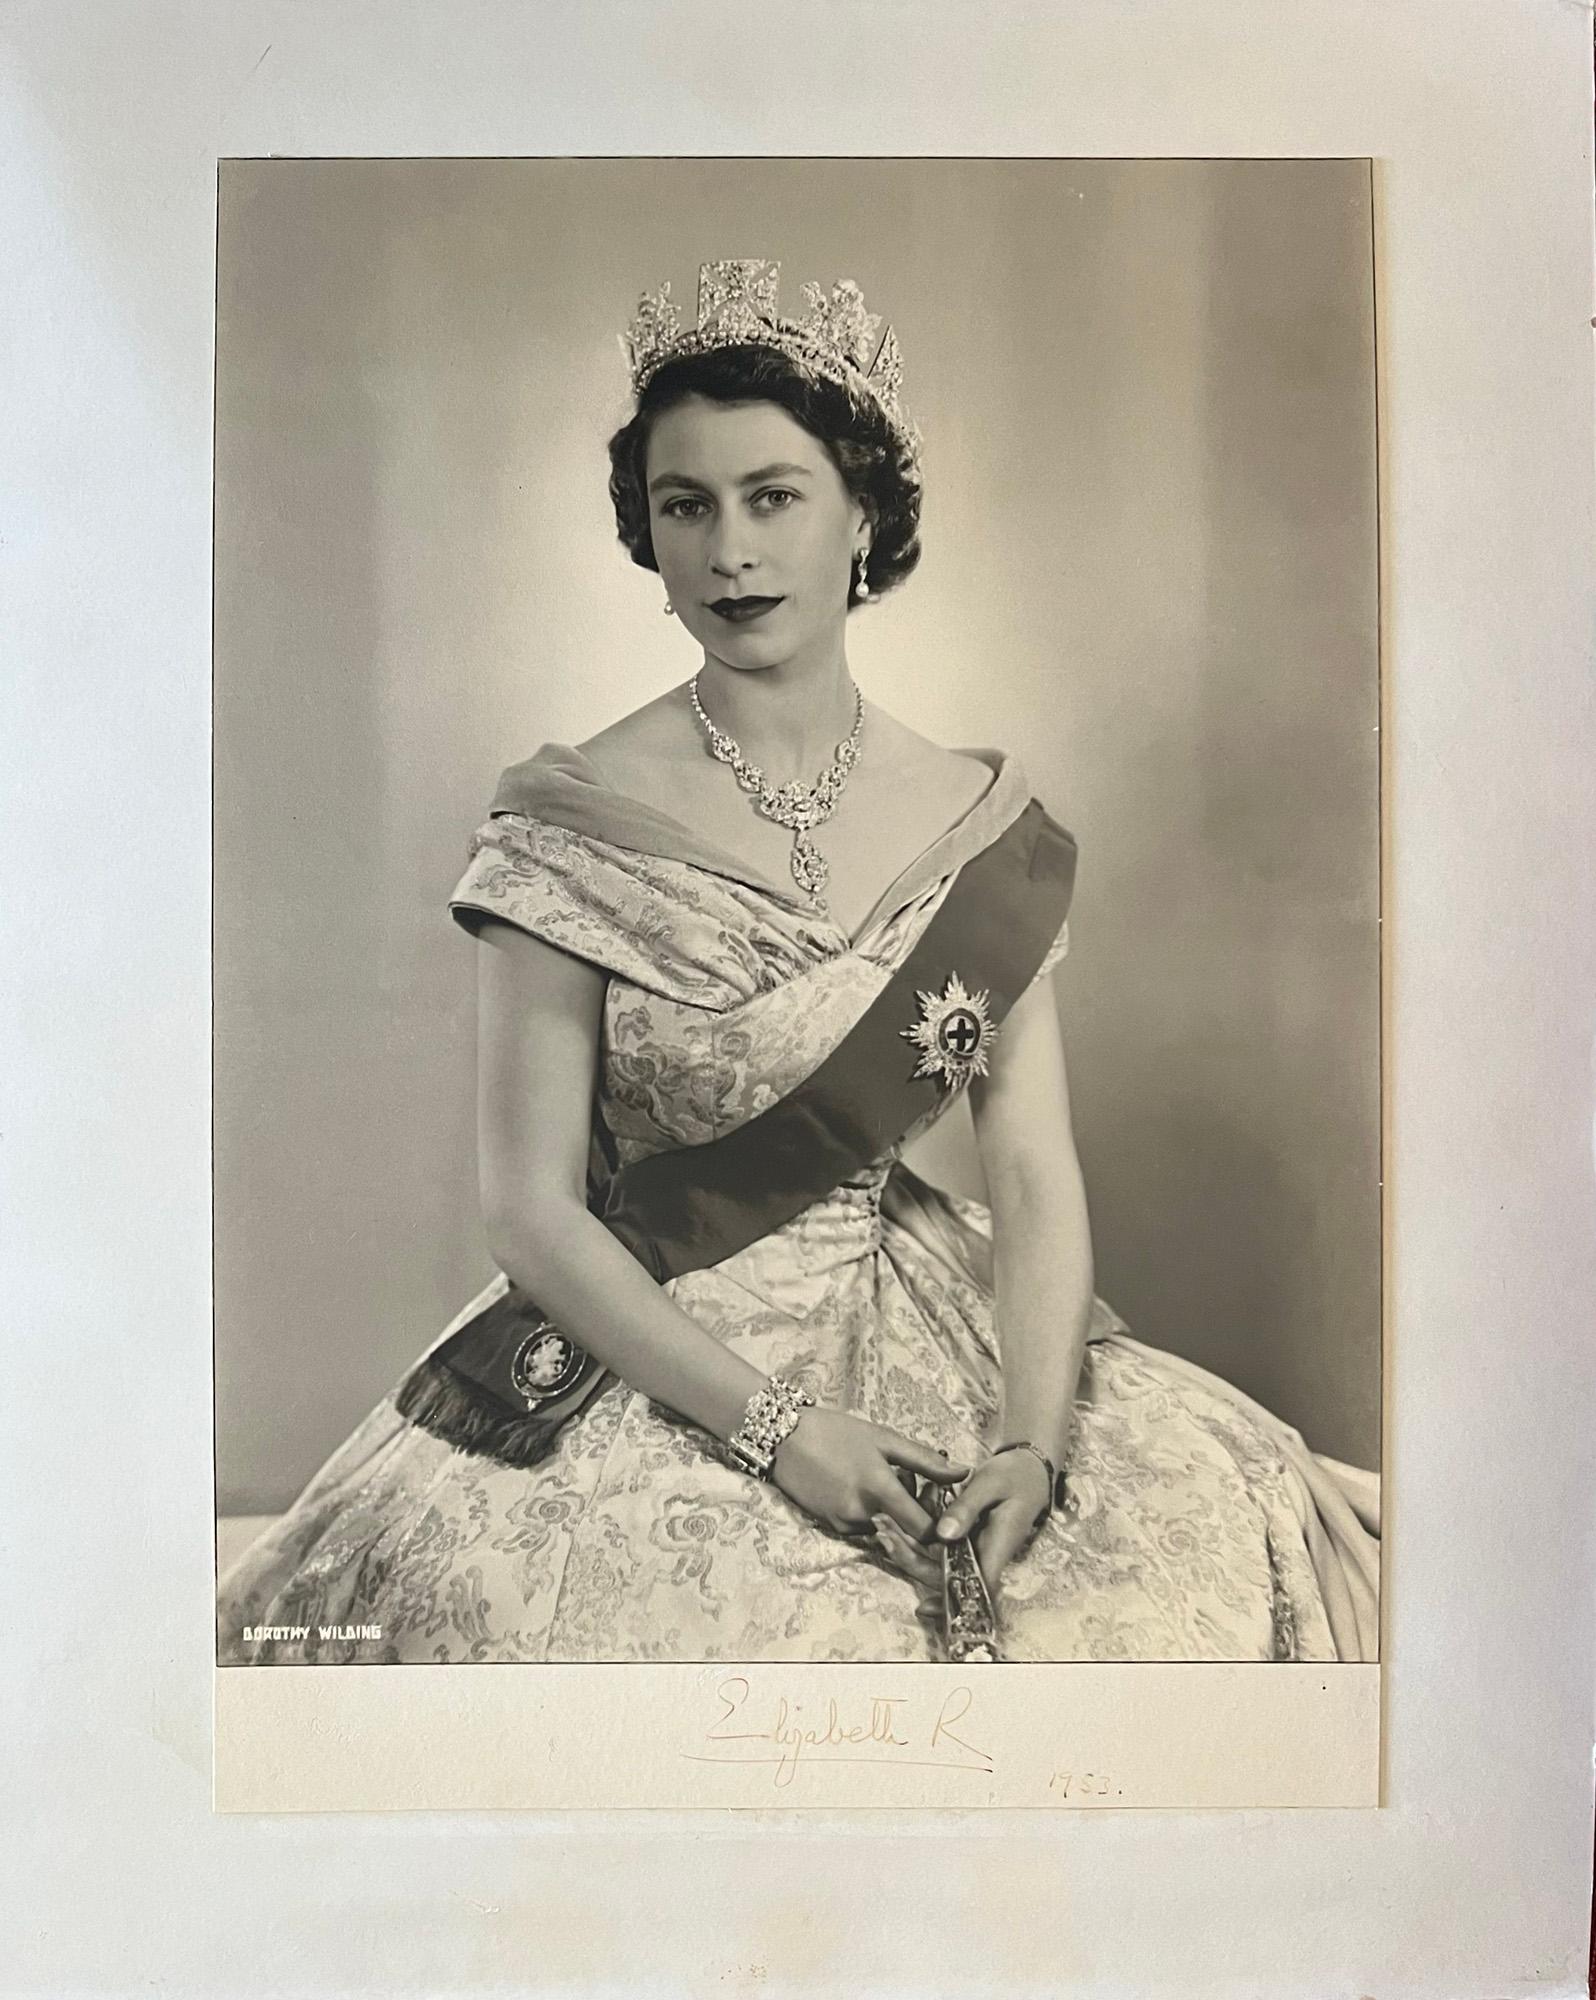 Queen Elizabeth II, portrait photograph by Dorothy Wilding.

Bromide photograph. 1953. Laid onto board. Signed by the Queen below the photograph, dated 1953. 

Dorothy Wilding was the first female Royal photographer. 

490mm by 345mm (photograph),